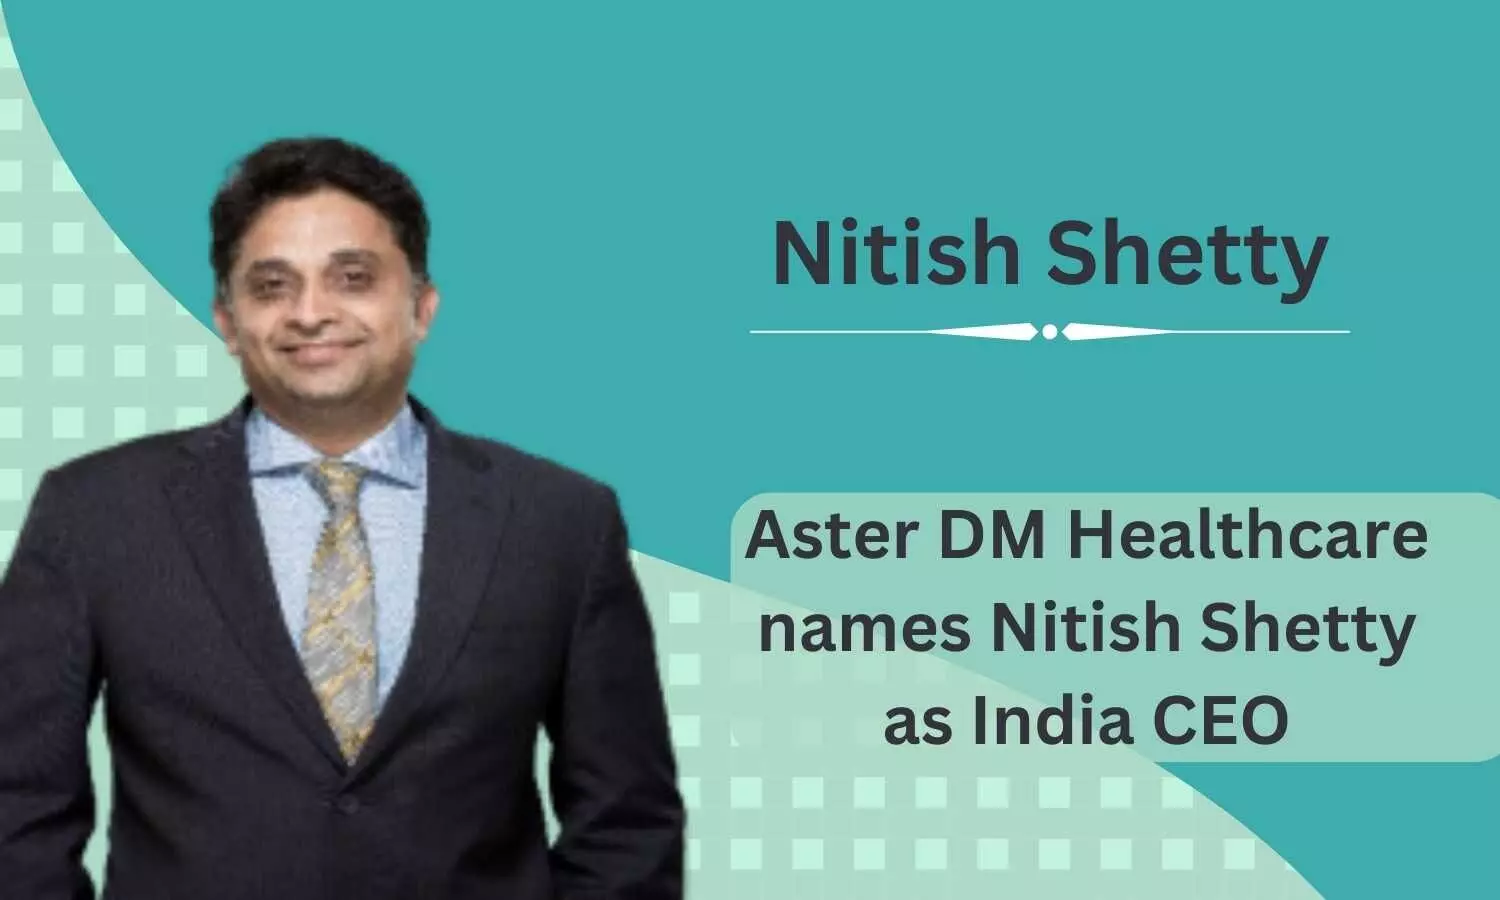 Aster DM Healthcare appoints Nitish Shetty as India CEO